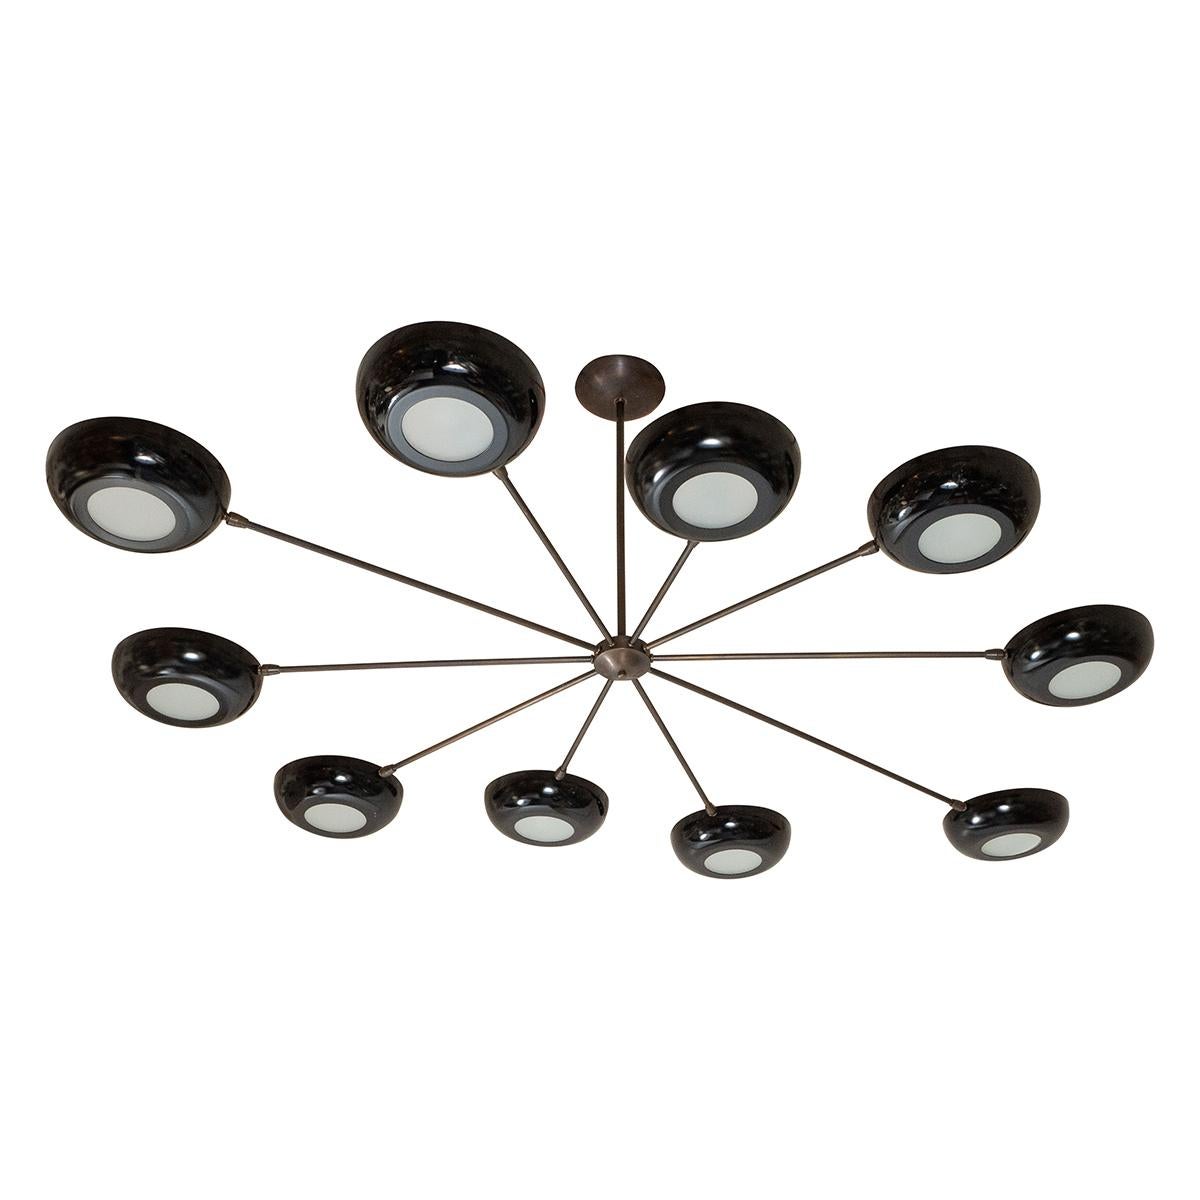 Ten-arm chandelier in antique brass and semi gloss satin black shades. Frosted glass fittings at the bottom of each standard base. It can be ordered in multiples and customized with different finishes and colors. Max 100 Watts per socket.